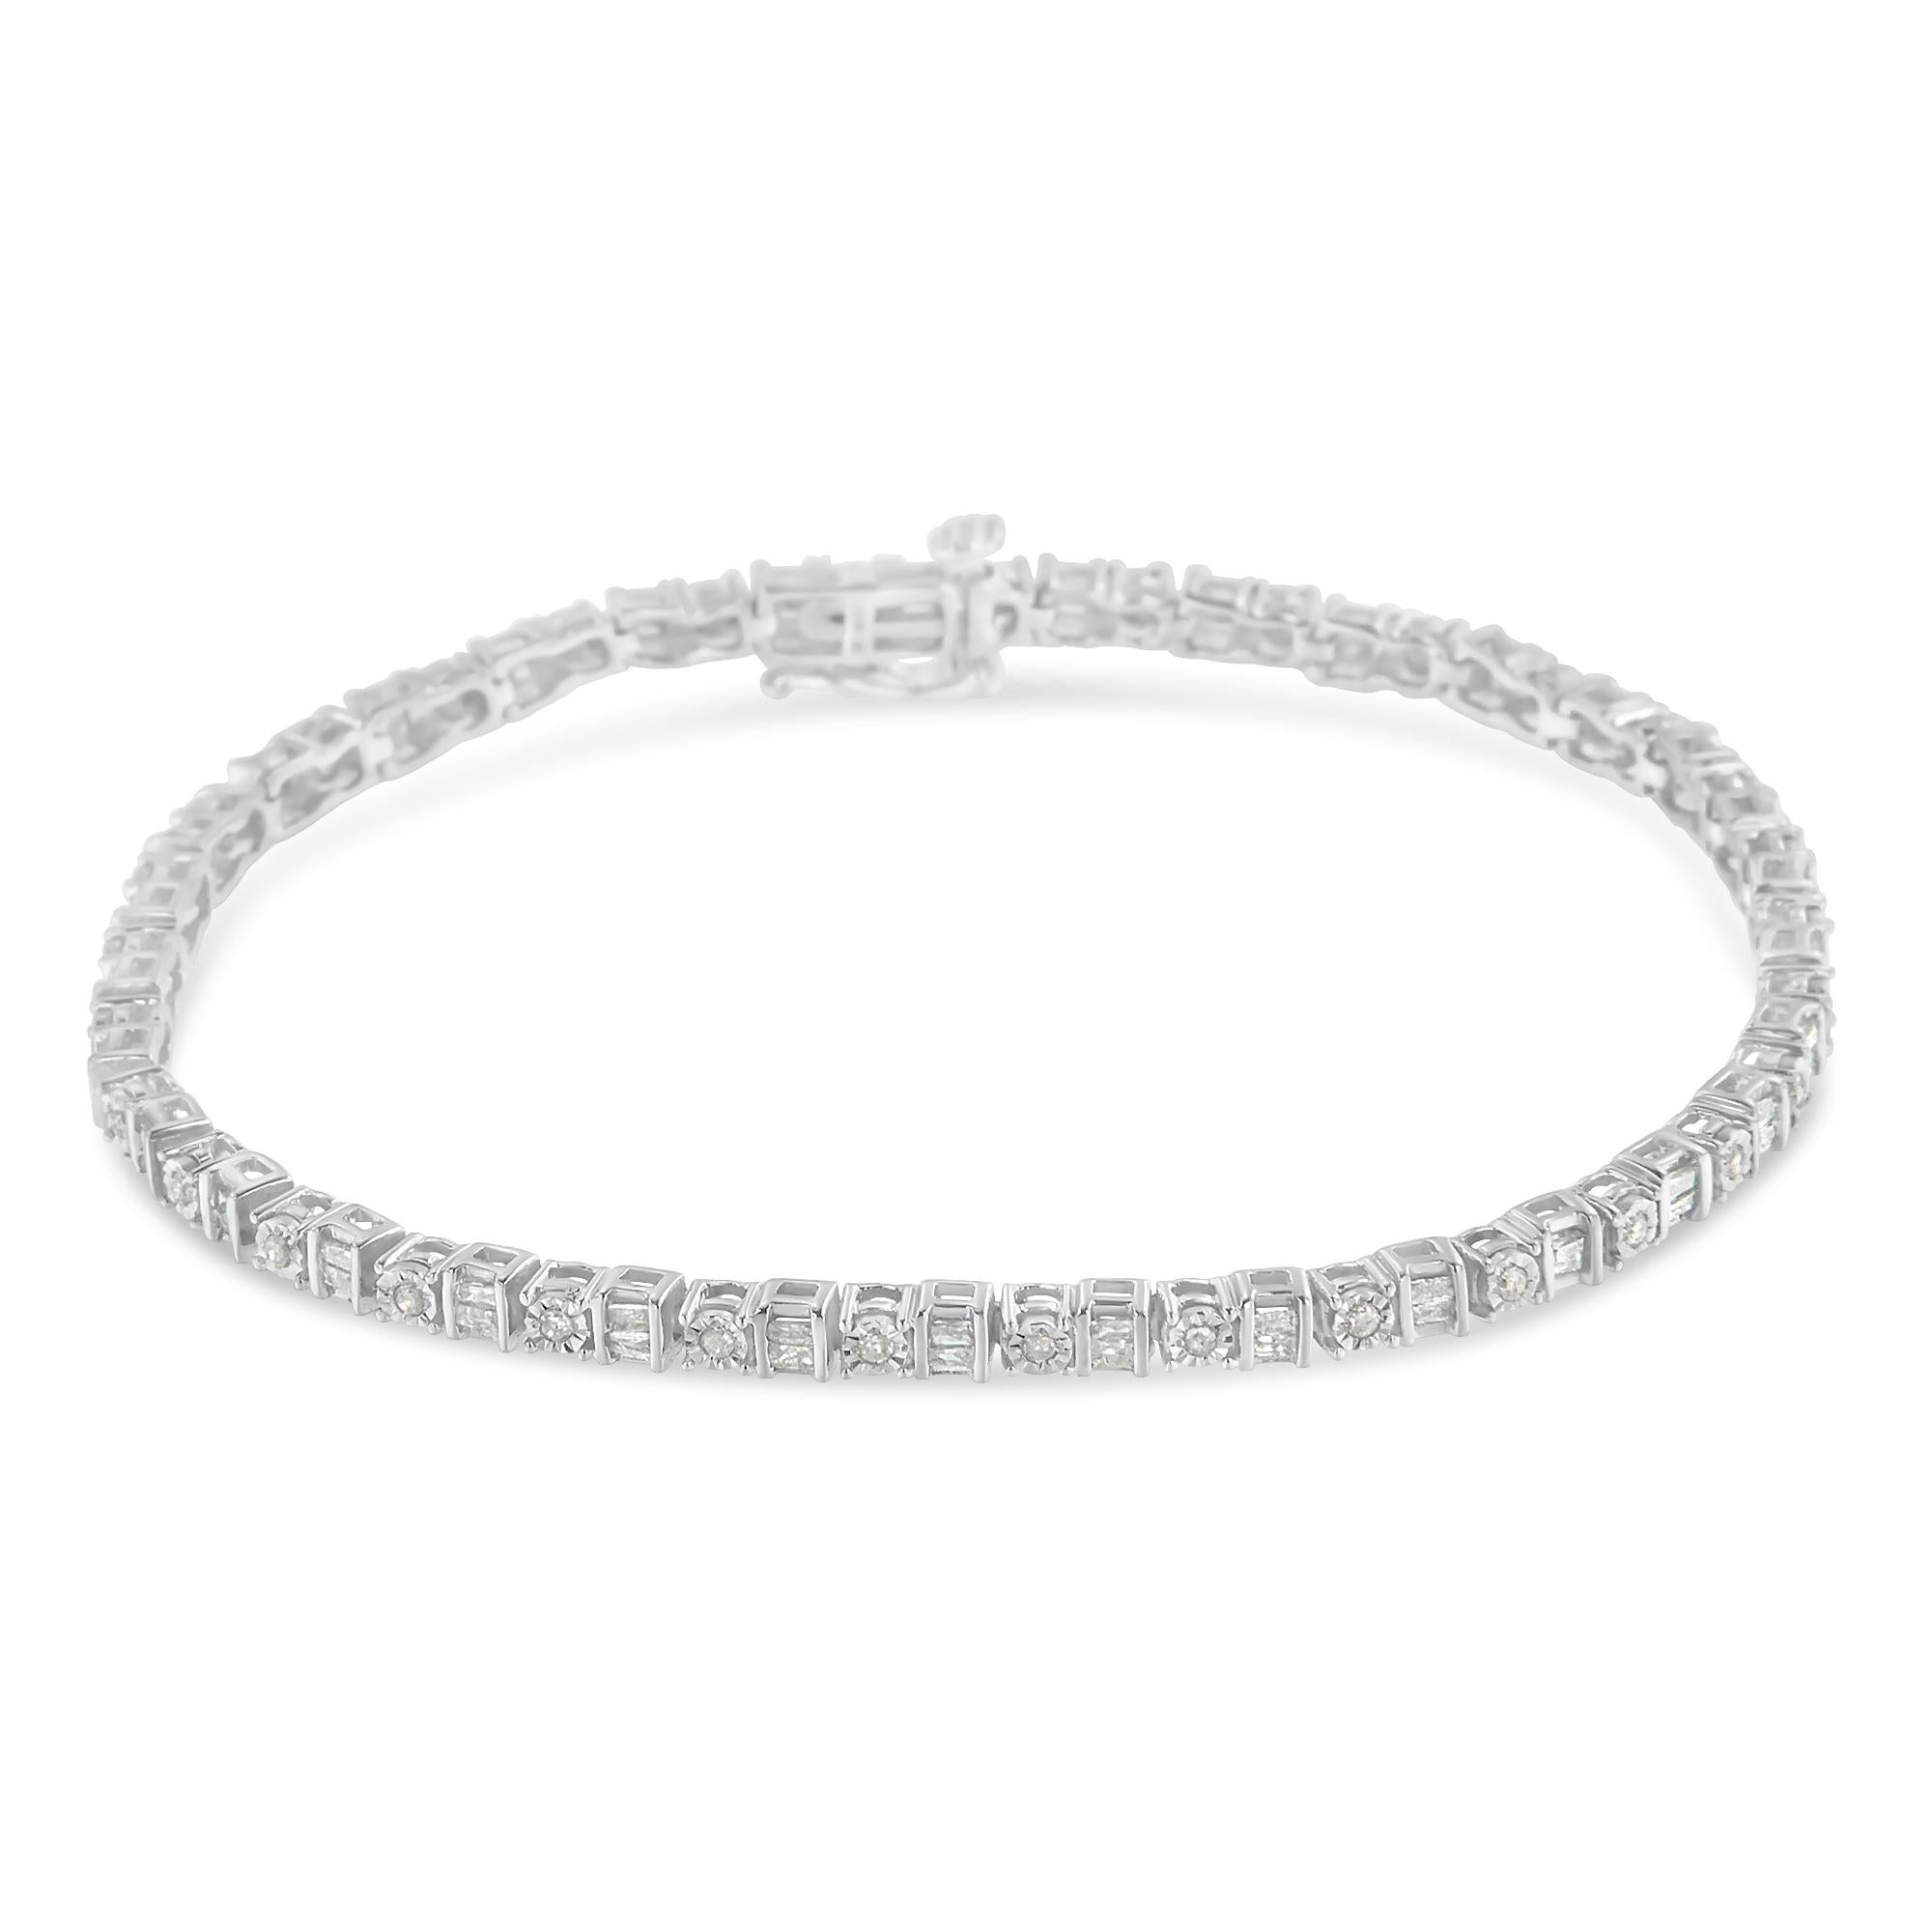 Elegant and timeless, this gorgeous sterling silver alternating station tennis bracelet features 1.0 carat total weight of round and baguette cut diamonds with a whopping 99 stones in all. The tennis bracelet features alternating round and square